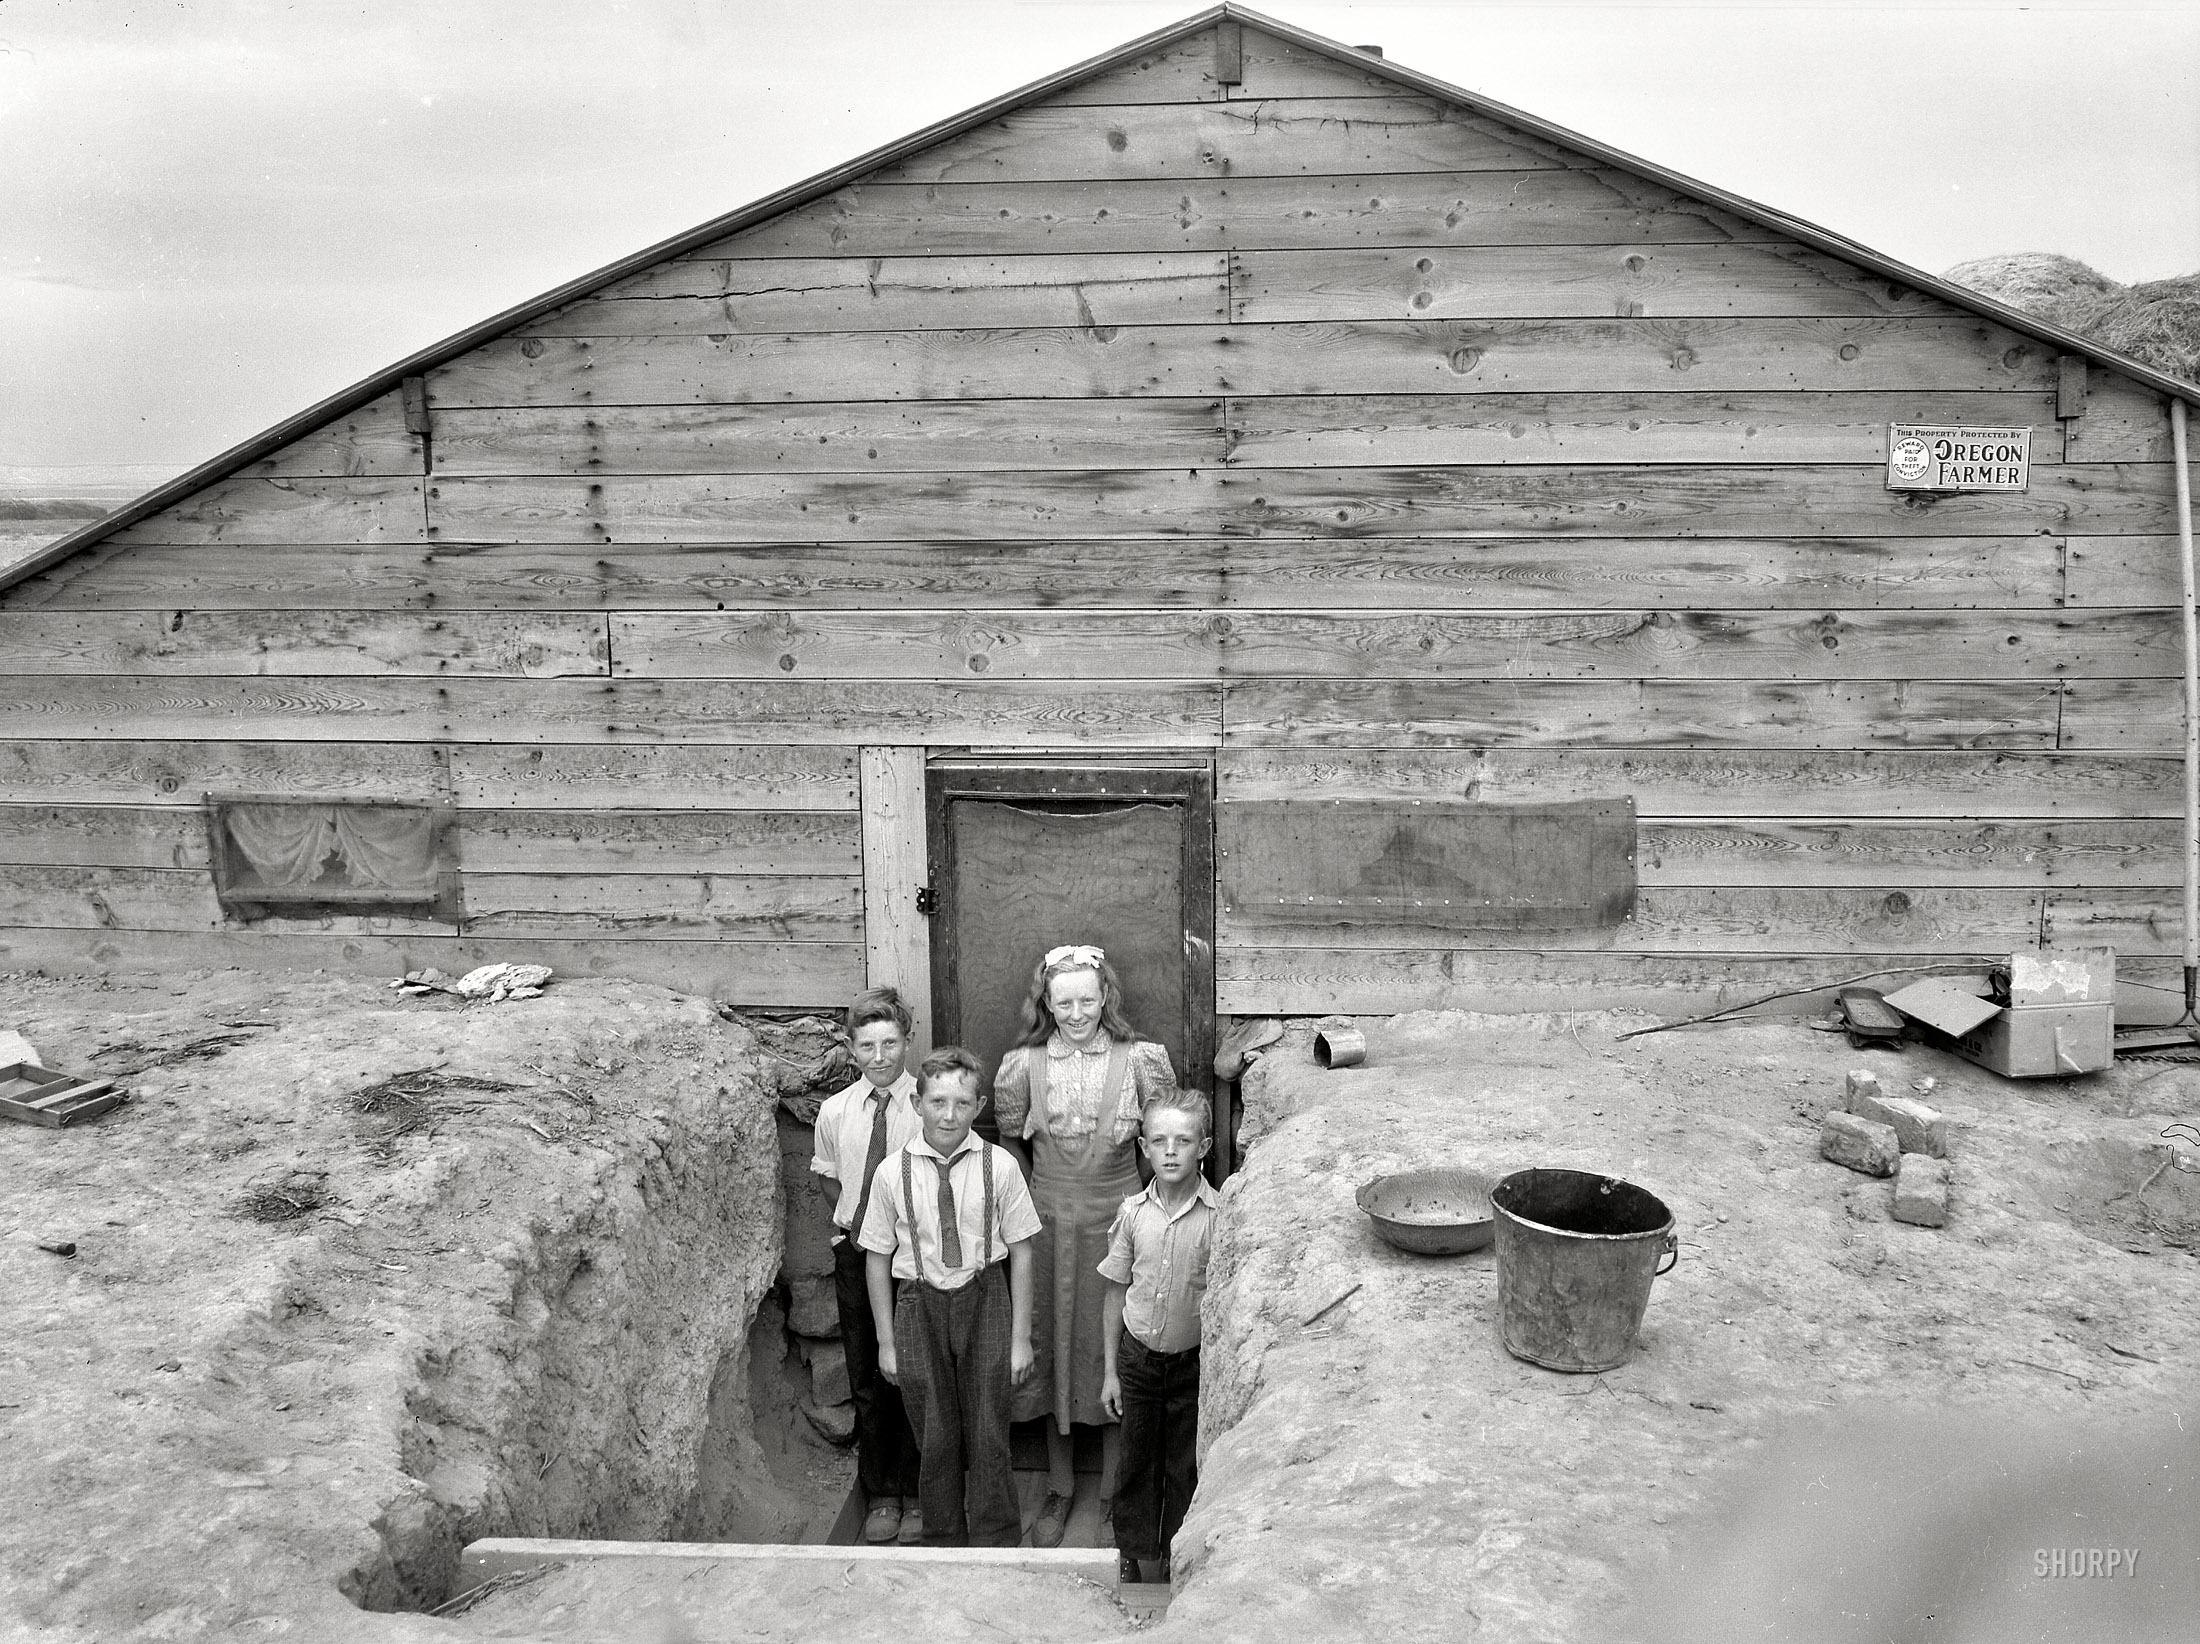 October 1939. "The Free children in doorway of their dugout home in Sunday clothes. Dead Ox Flat, Malheur County, Oregon." Medium format nitrate negative by Dorothea Lange for the Farm Security Administration. View full size.